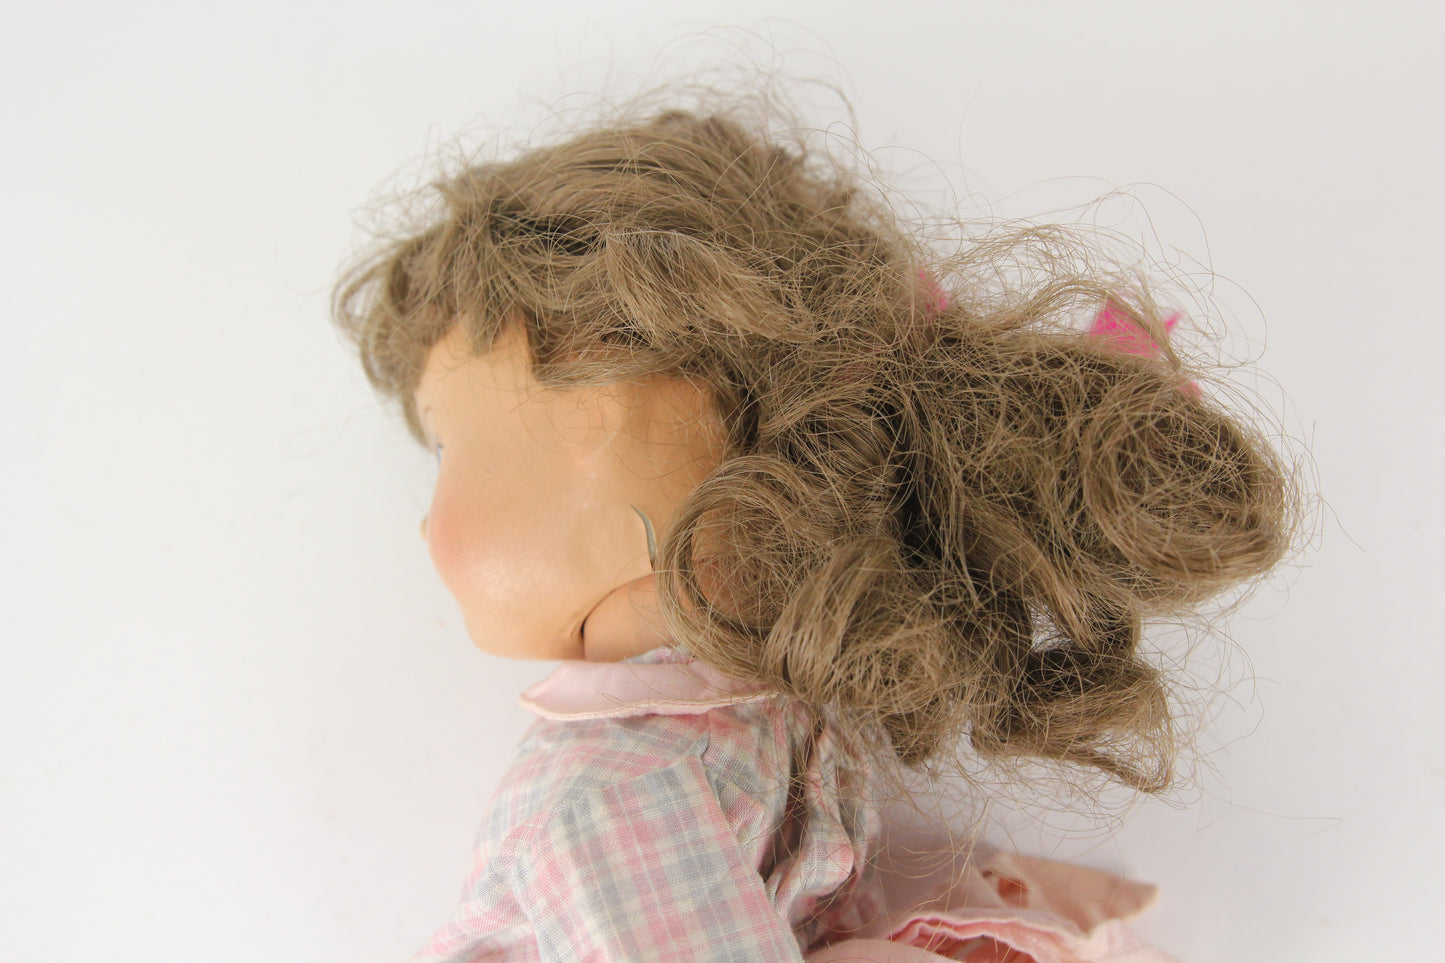 Composition Little Girl Baby Doll With Plaid Dress and Curly Brunette Wig, 15"